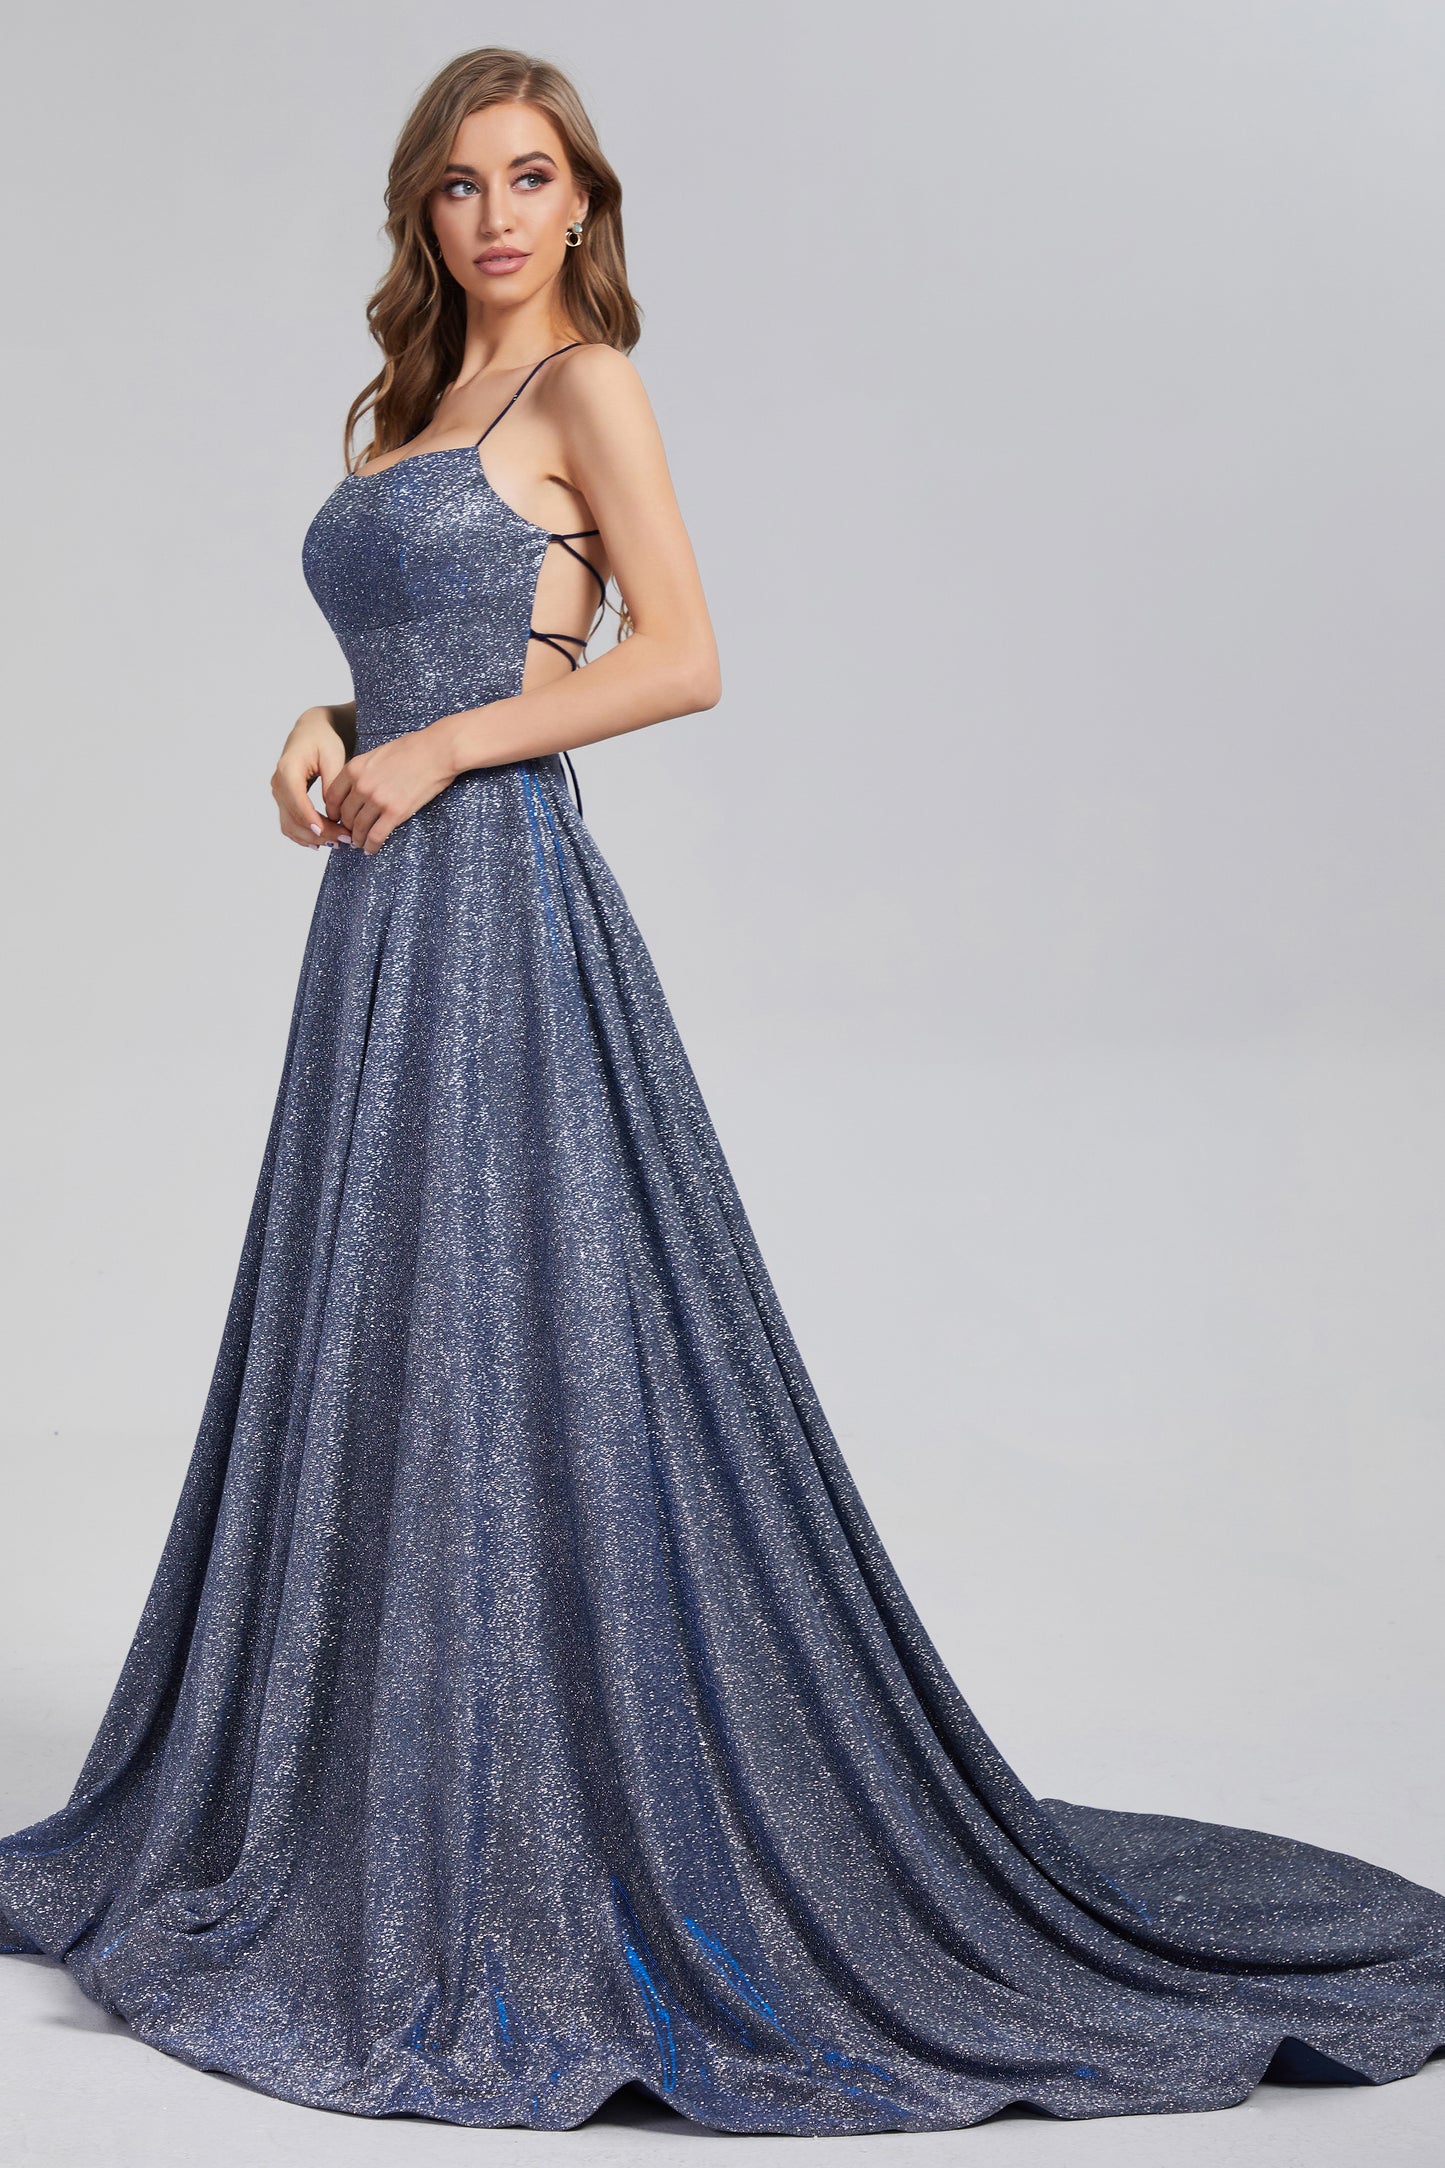 Sparkly Criss Cross Prom Dresses with Trailing